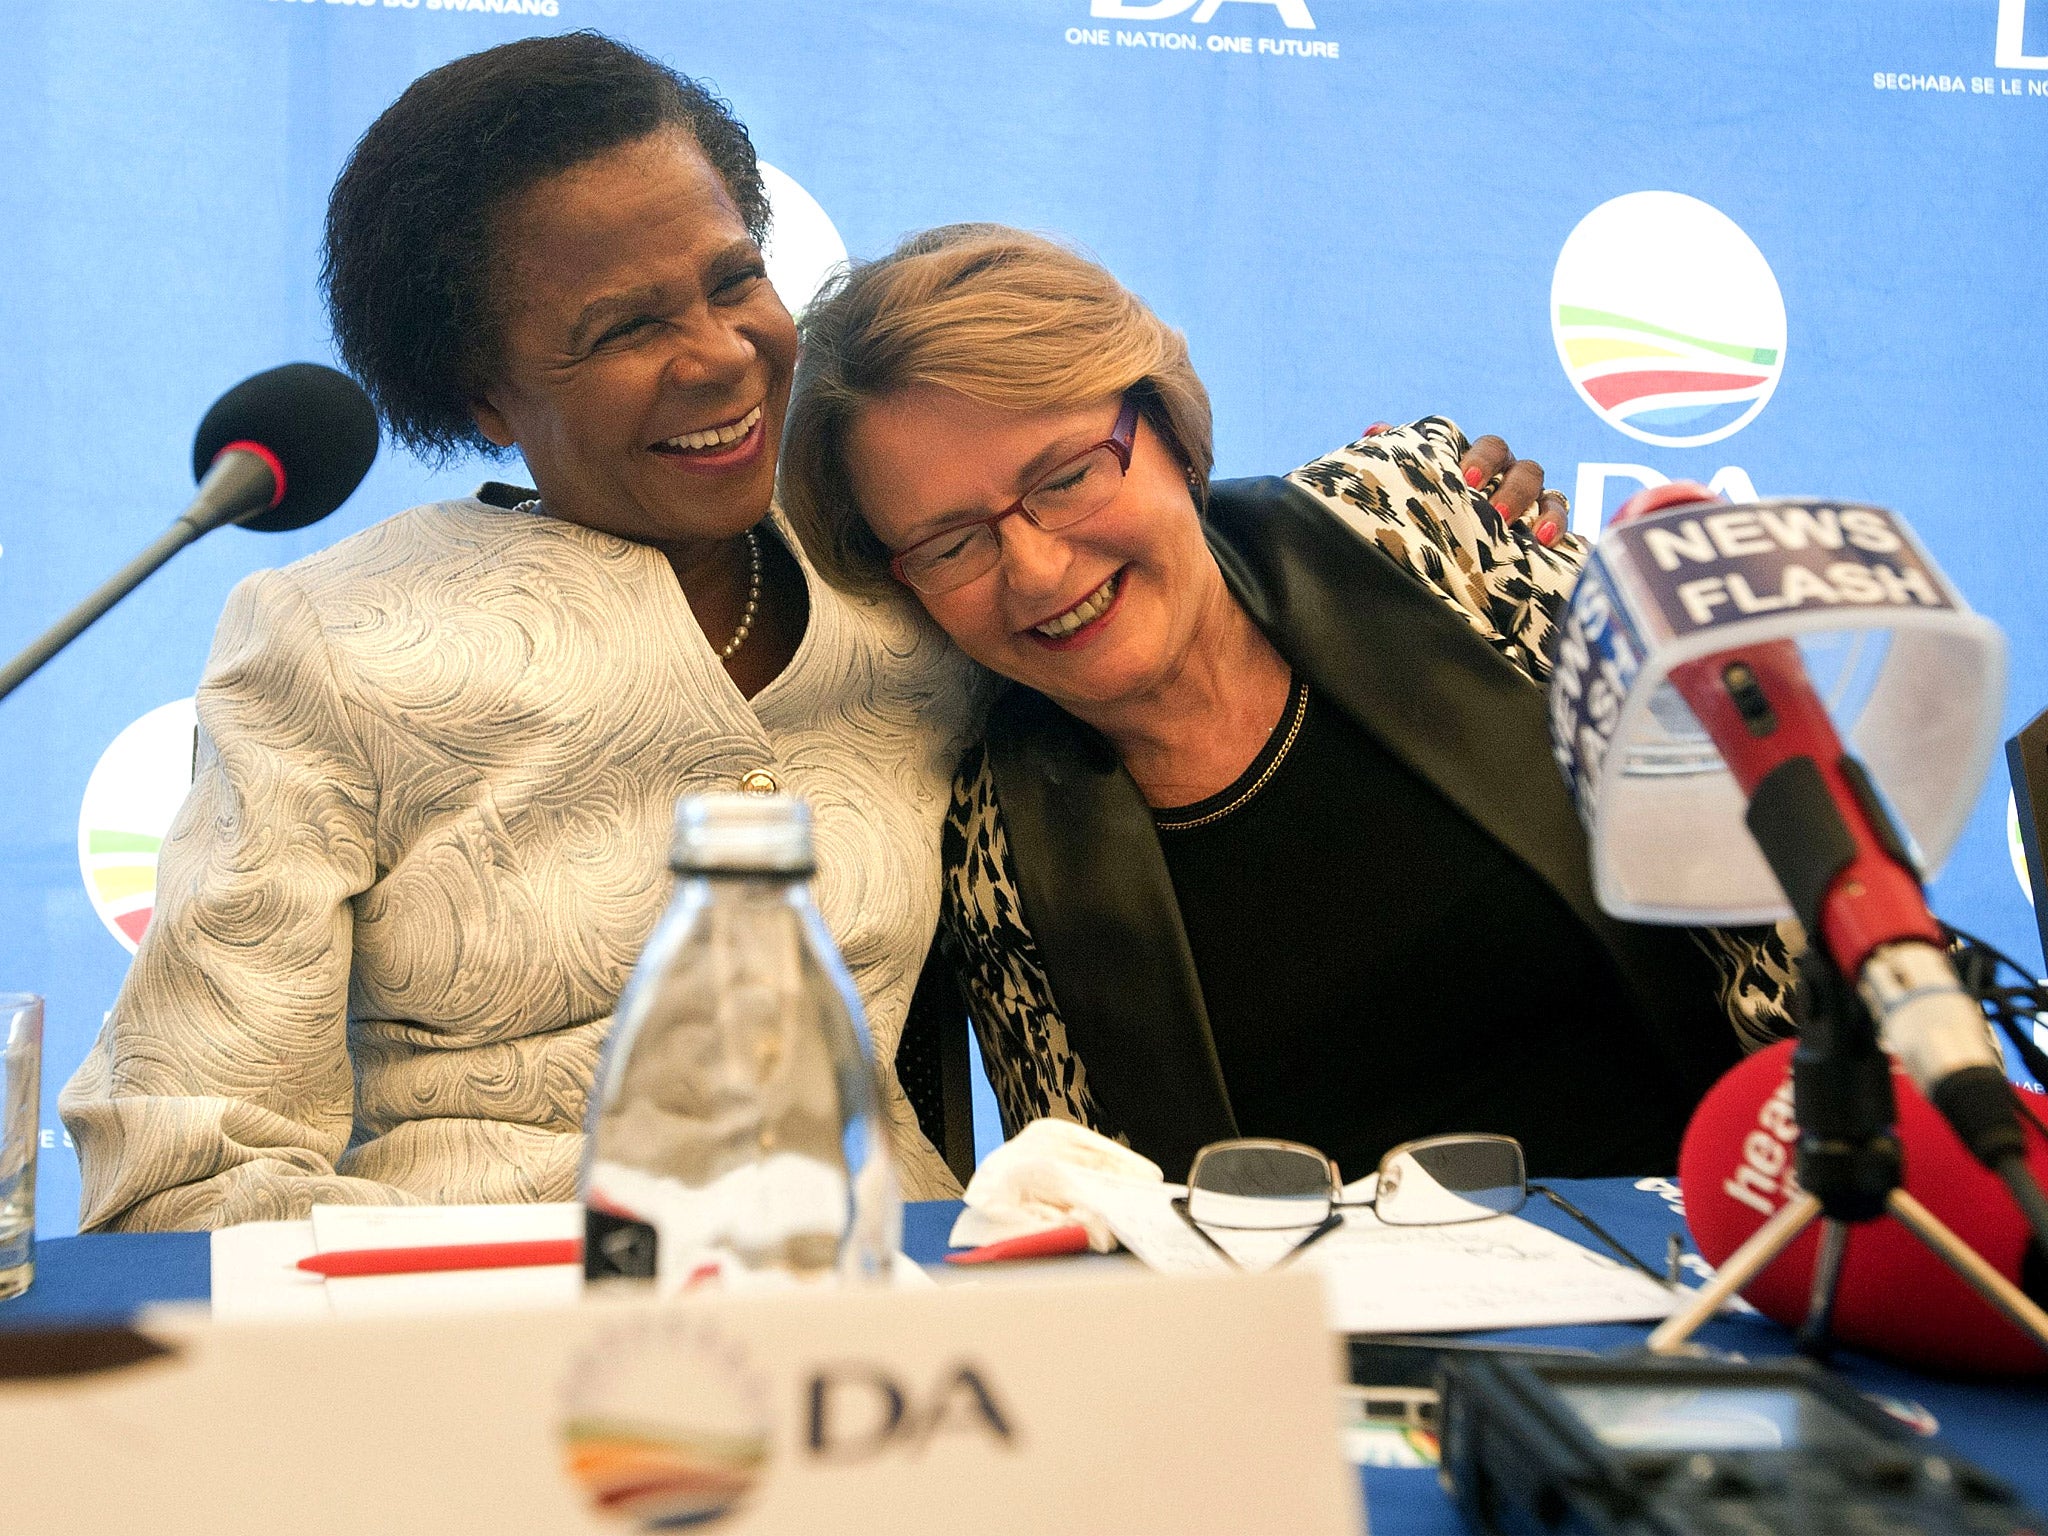 Helen Zille (right), leader of the Democratic Alliance, is hugged by Mamphela Ramphele at the Cape Town conference